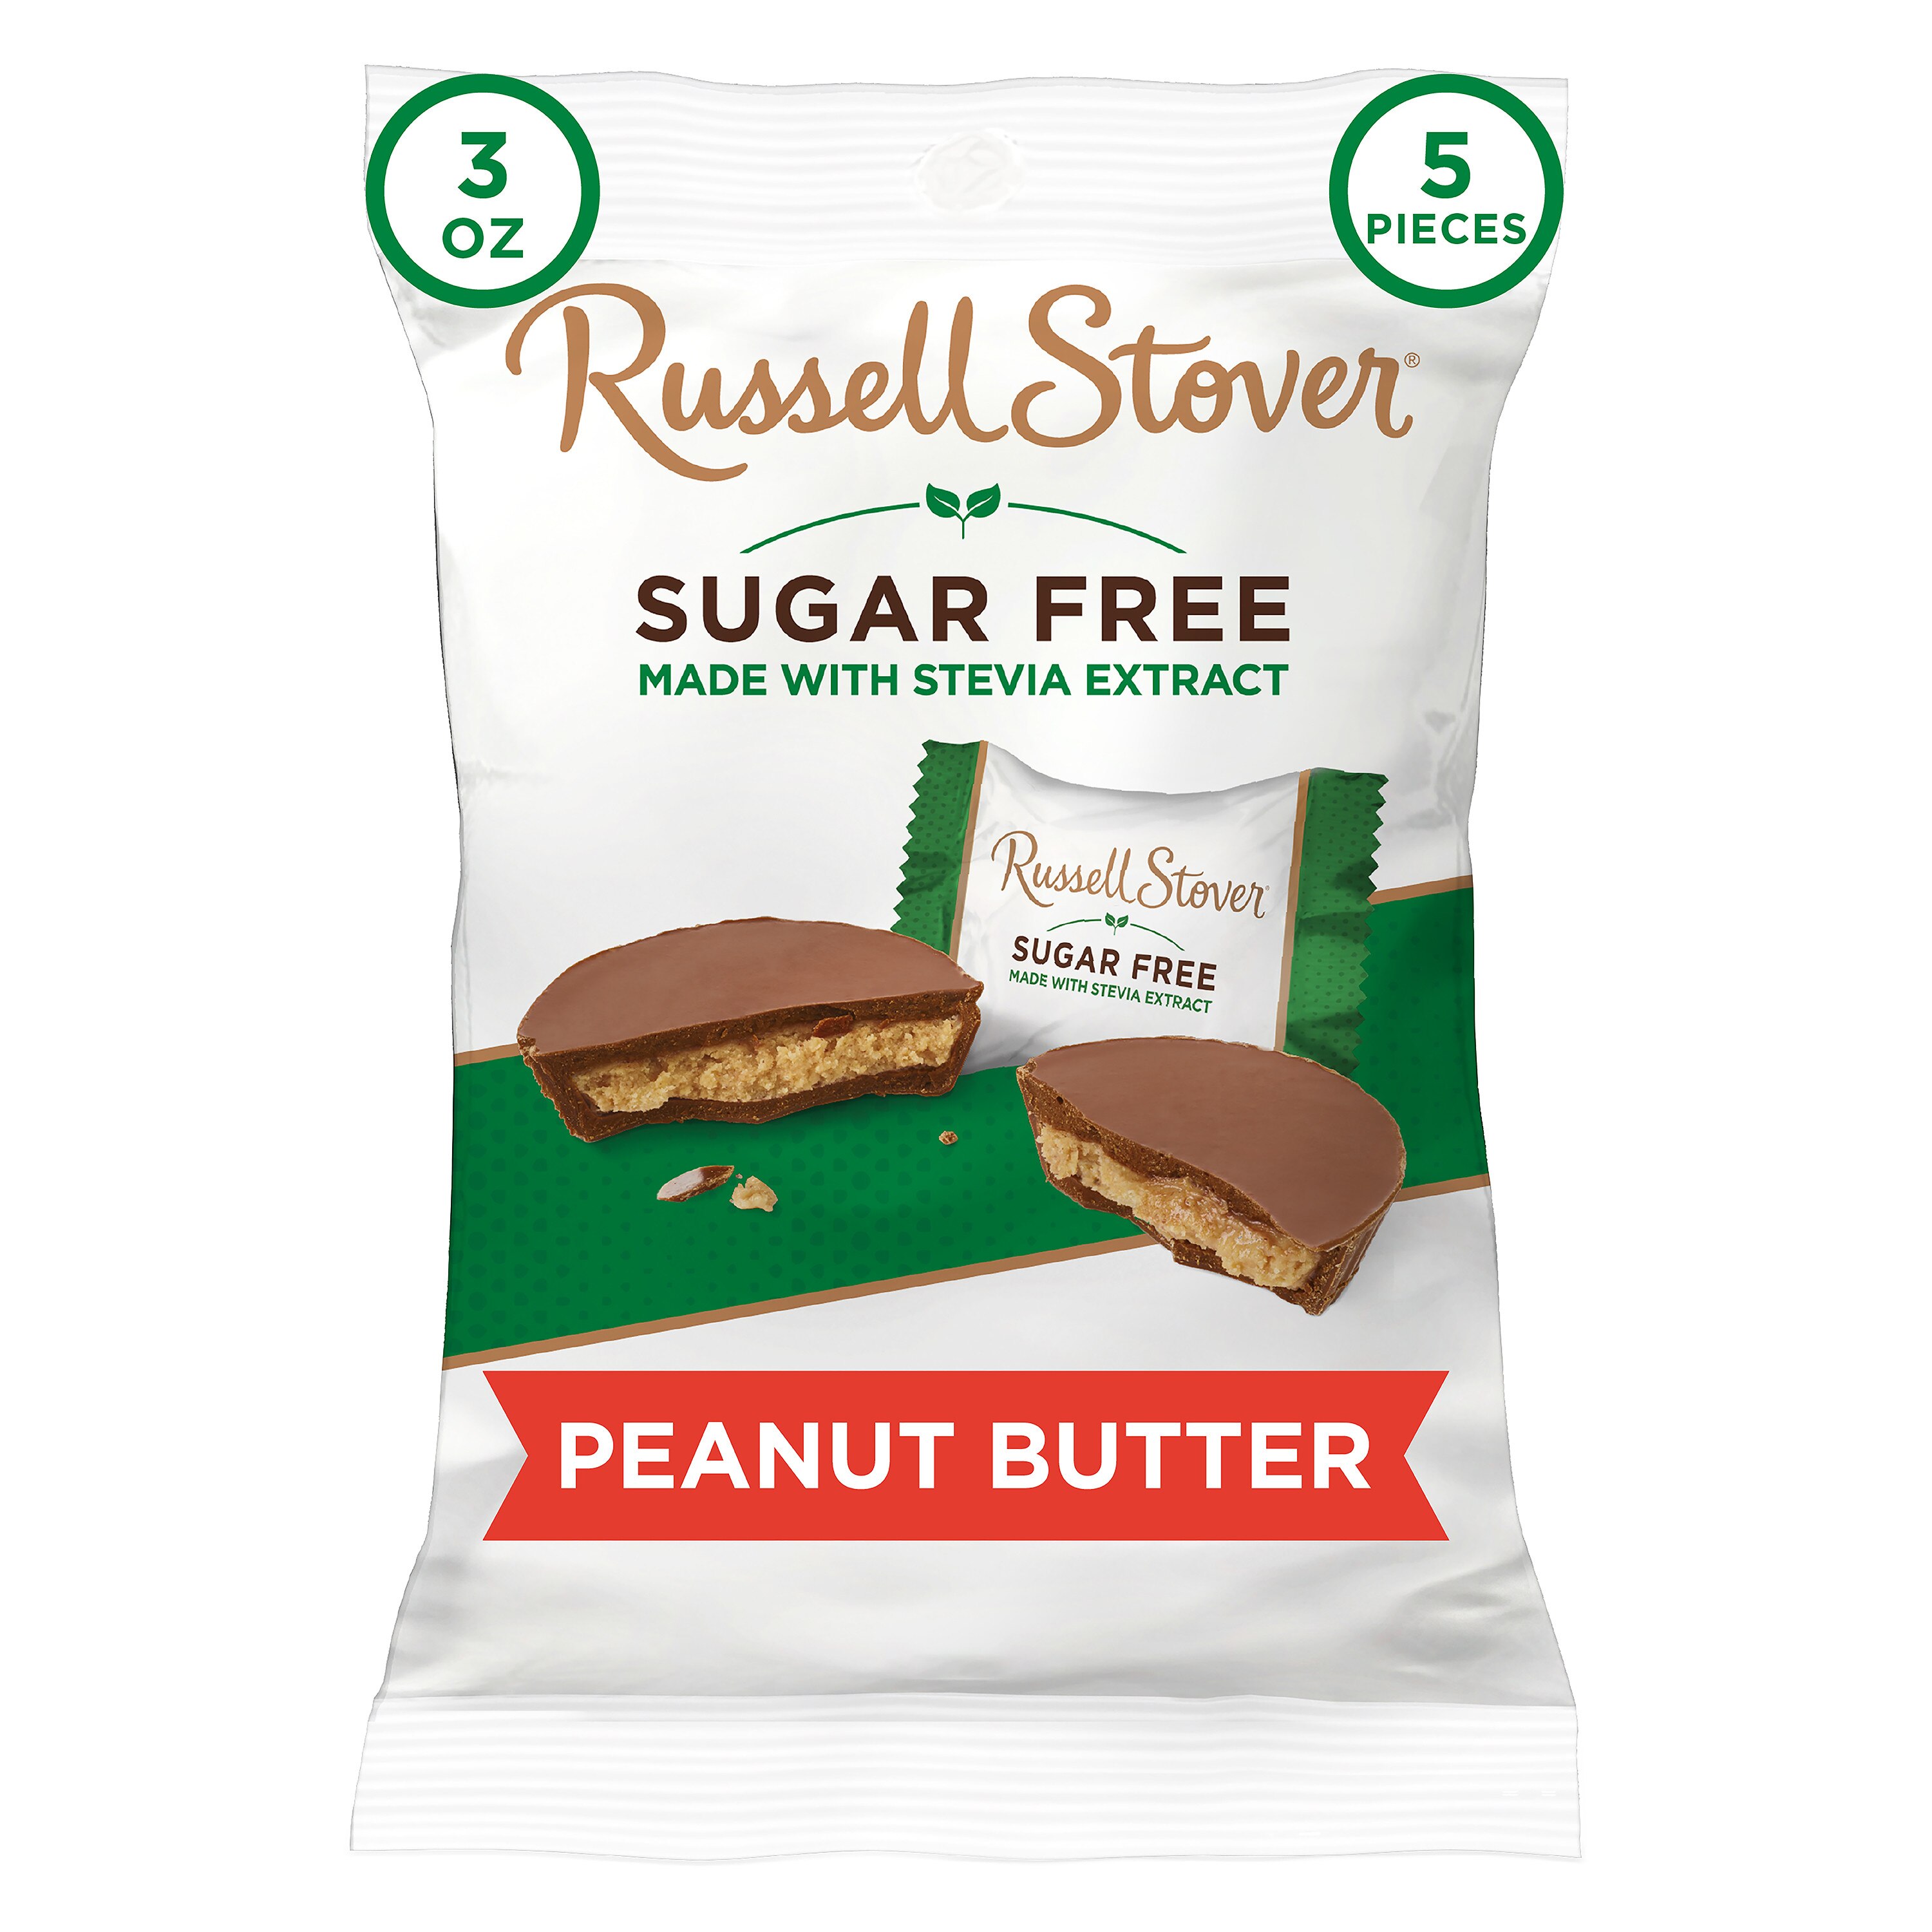  Russell Stover Sugar Free Peanut Butter Cups with Stevia, 3 OZ 